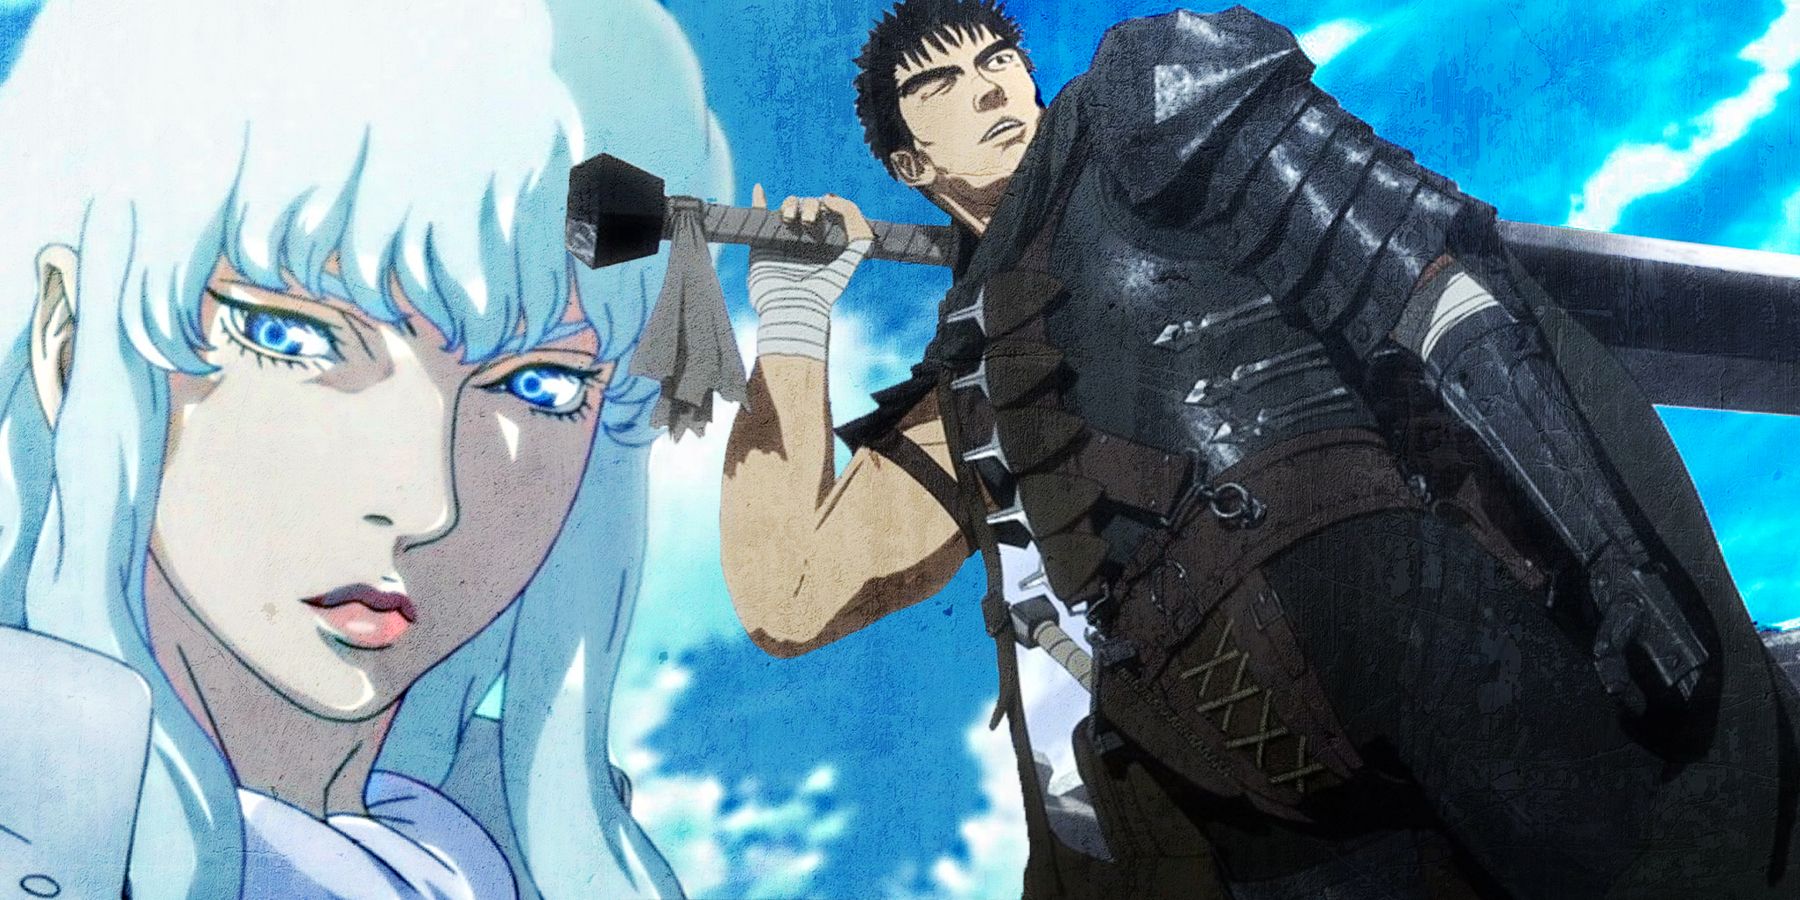 Berserk: Griffith's Reborn Band of the Hawk Was Reclaiming The World